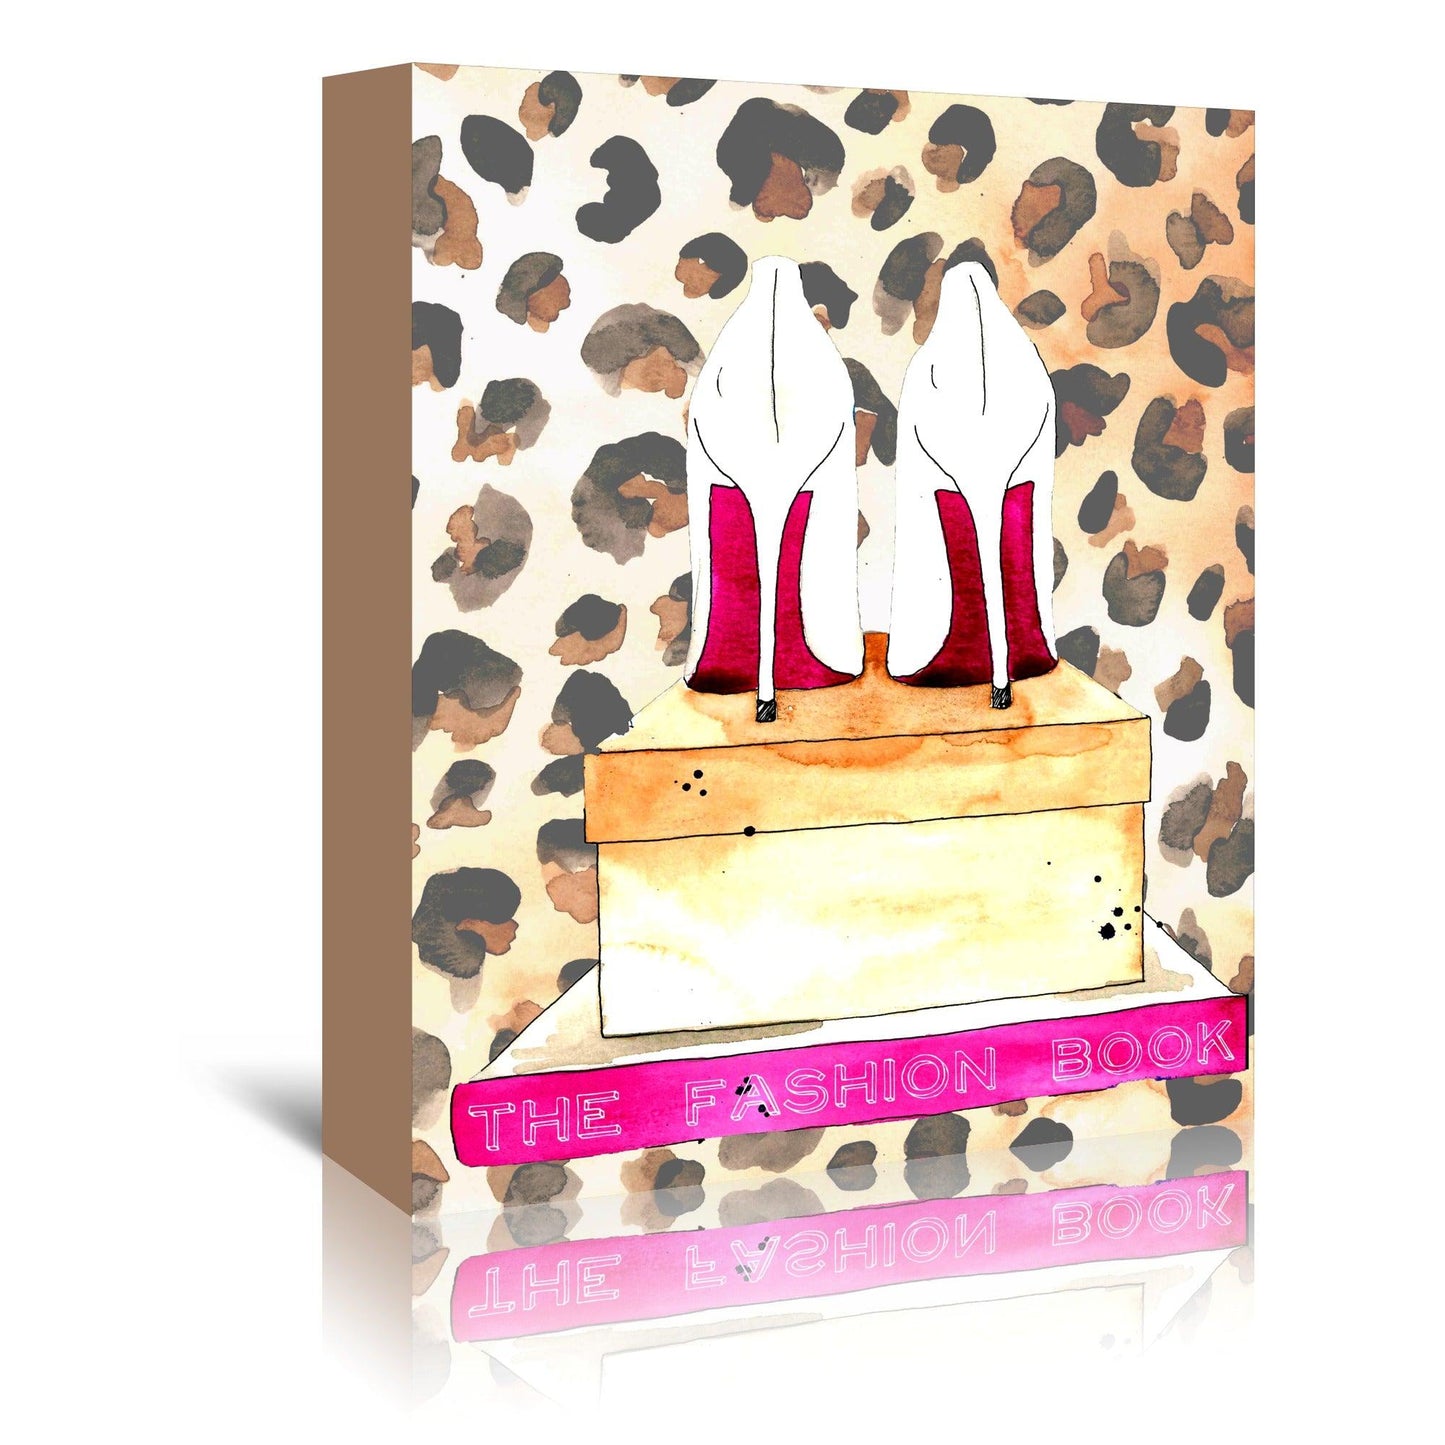 Shoe Box Society by Kelsey Mcnatt - Wrapped Canvas - Wrapped Canvas - Americanflat